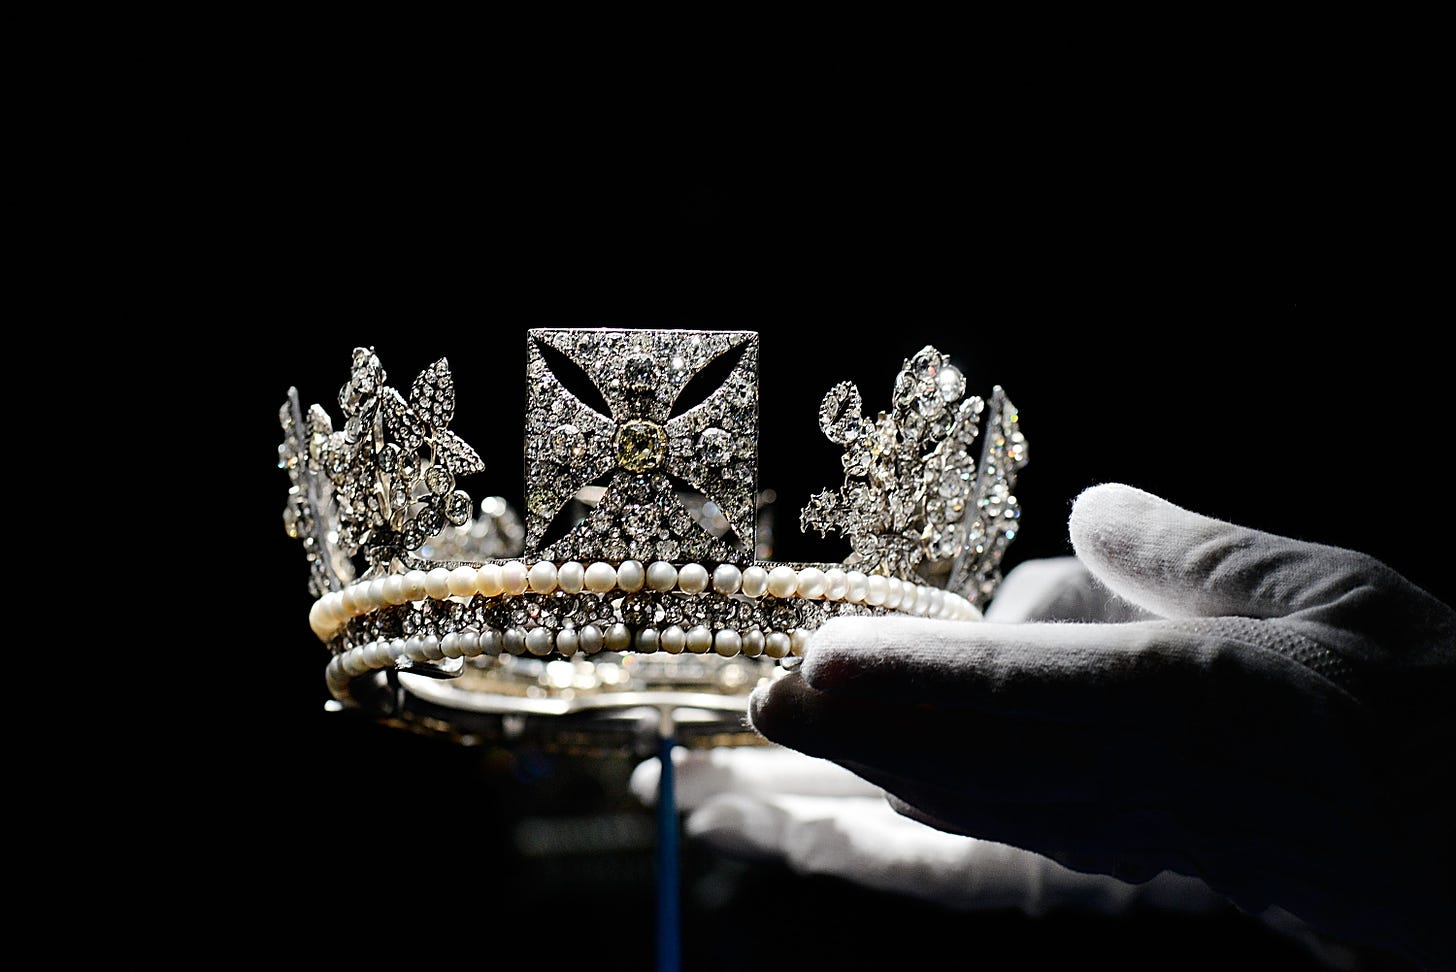 Close-up of the diamond diadem held by hands wearing white gloves